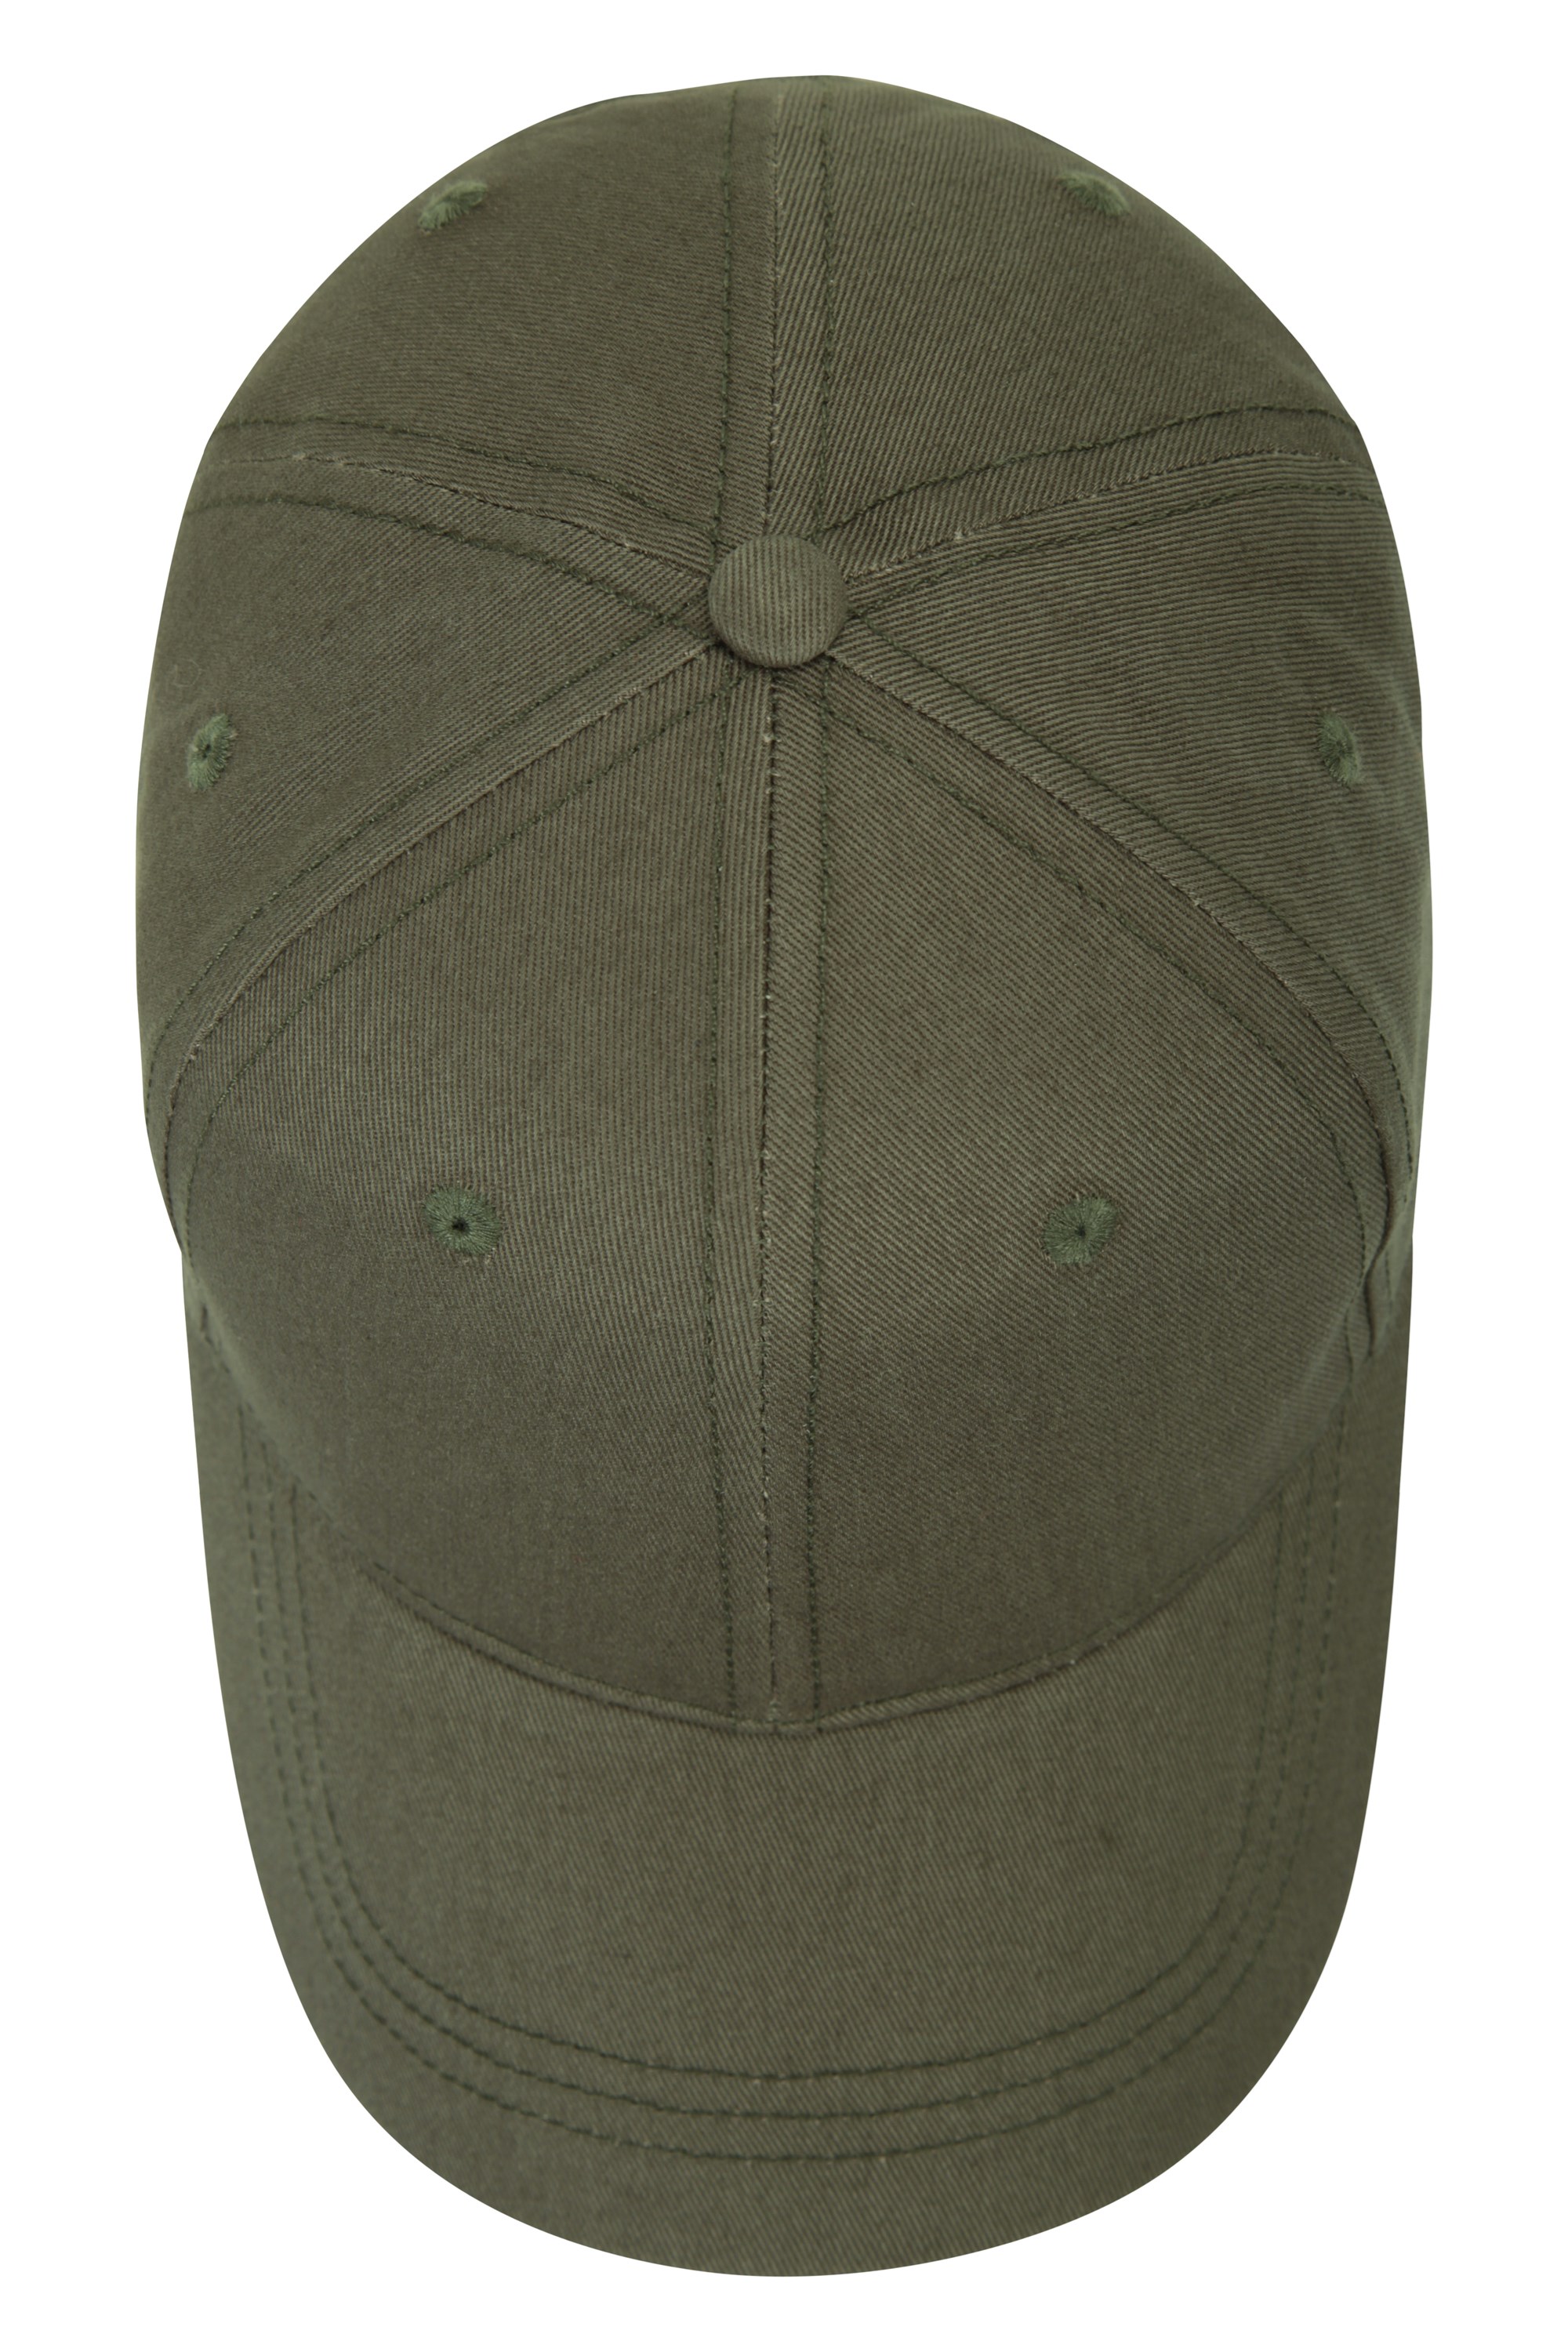 Mountain Warehouse Outback Womens Coverage Cap - Beige | Size ONE